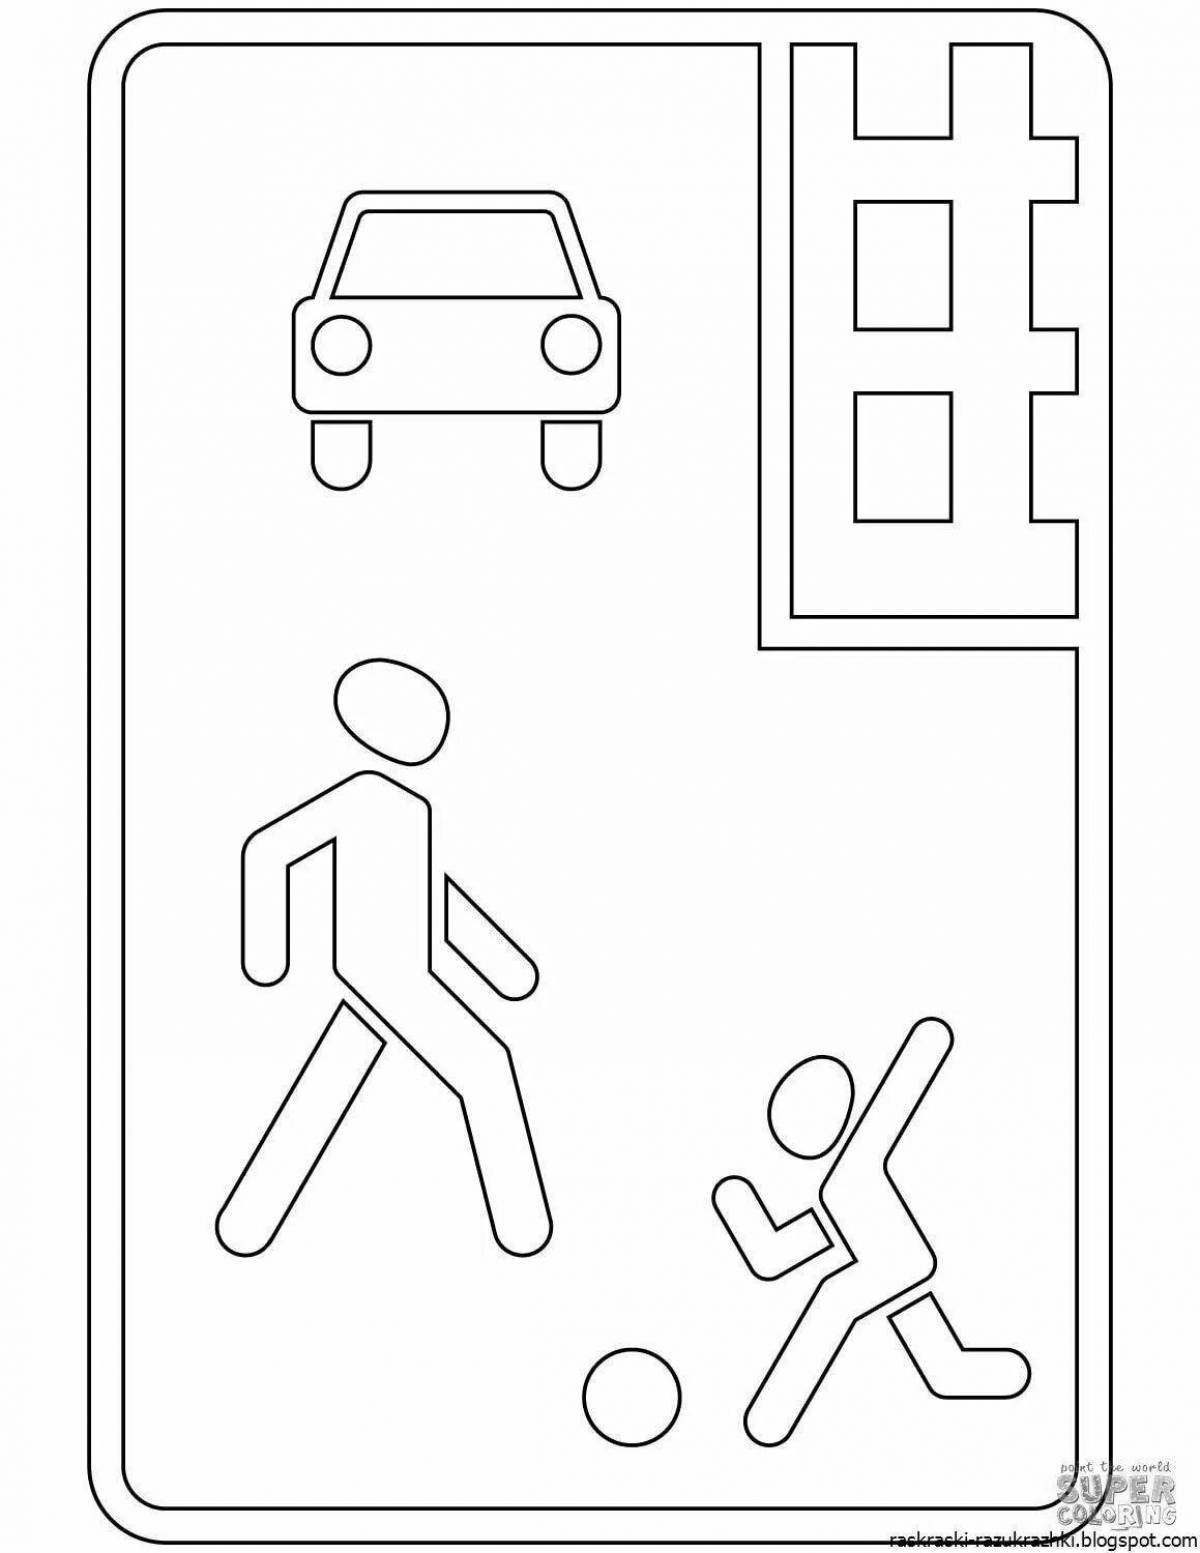 Coloring for a pedestrian crossing for children 6-7 years old